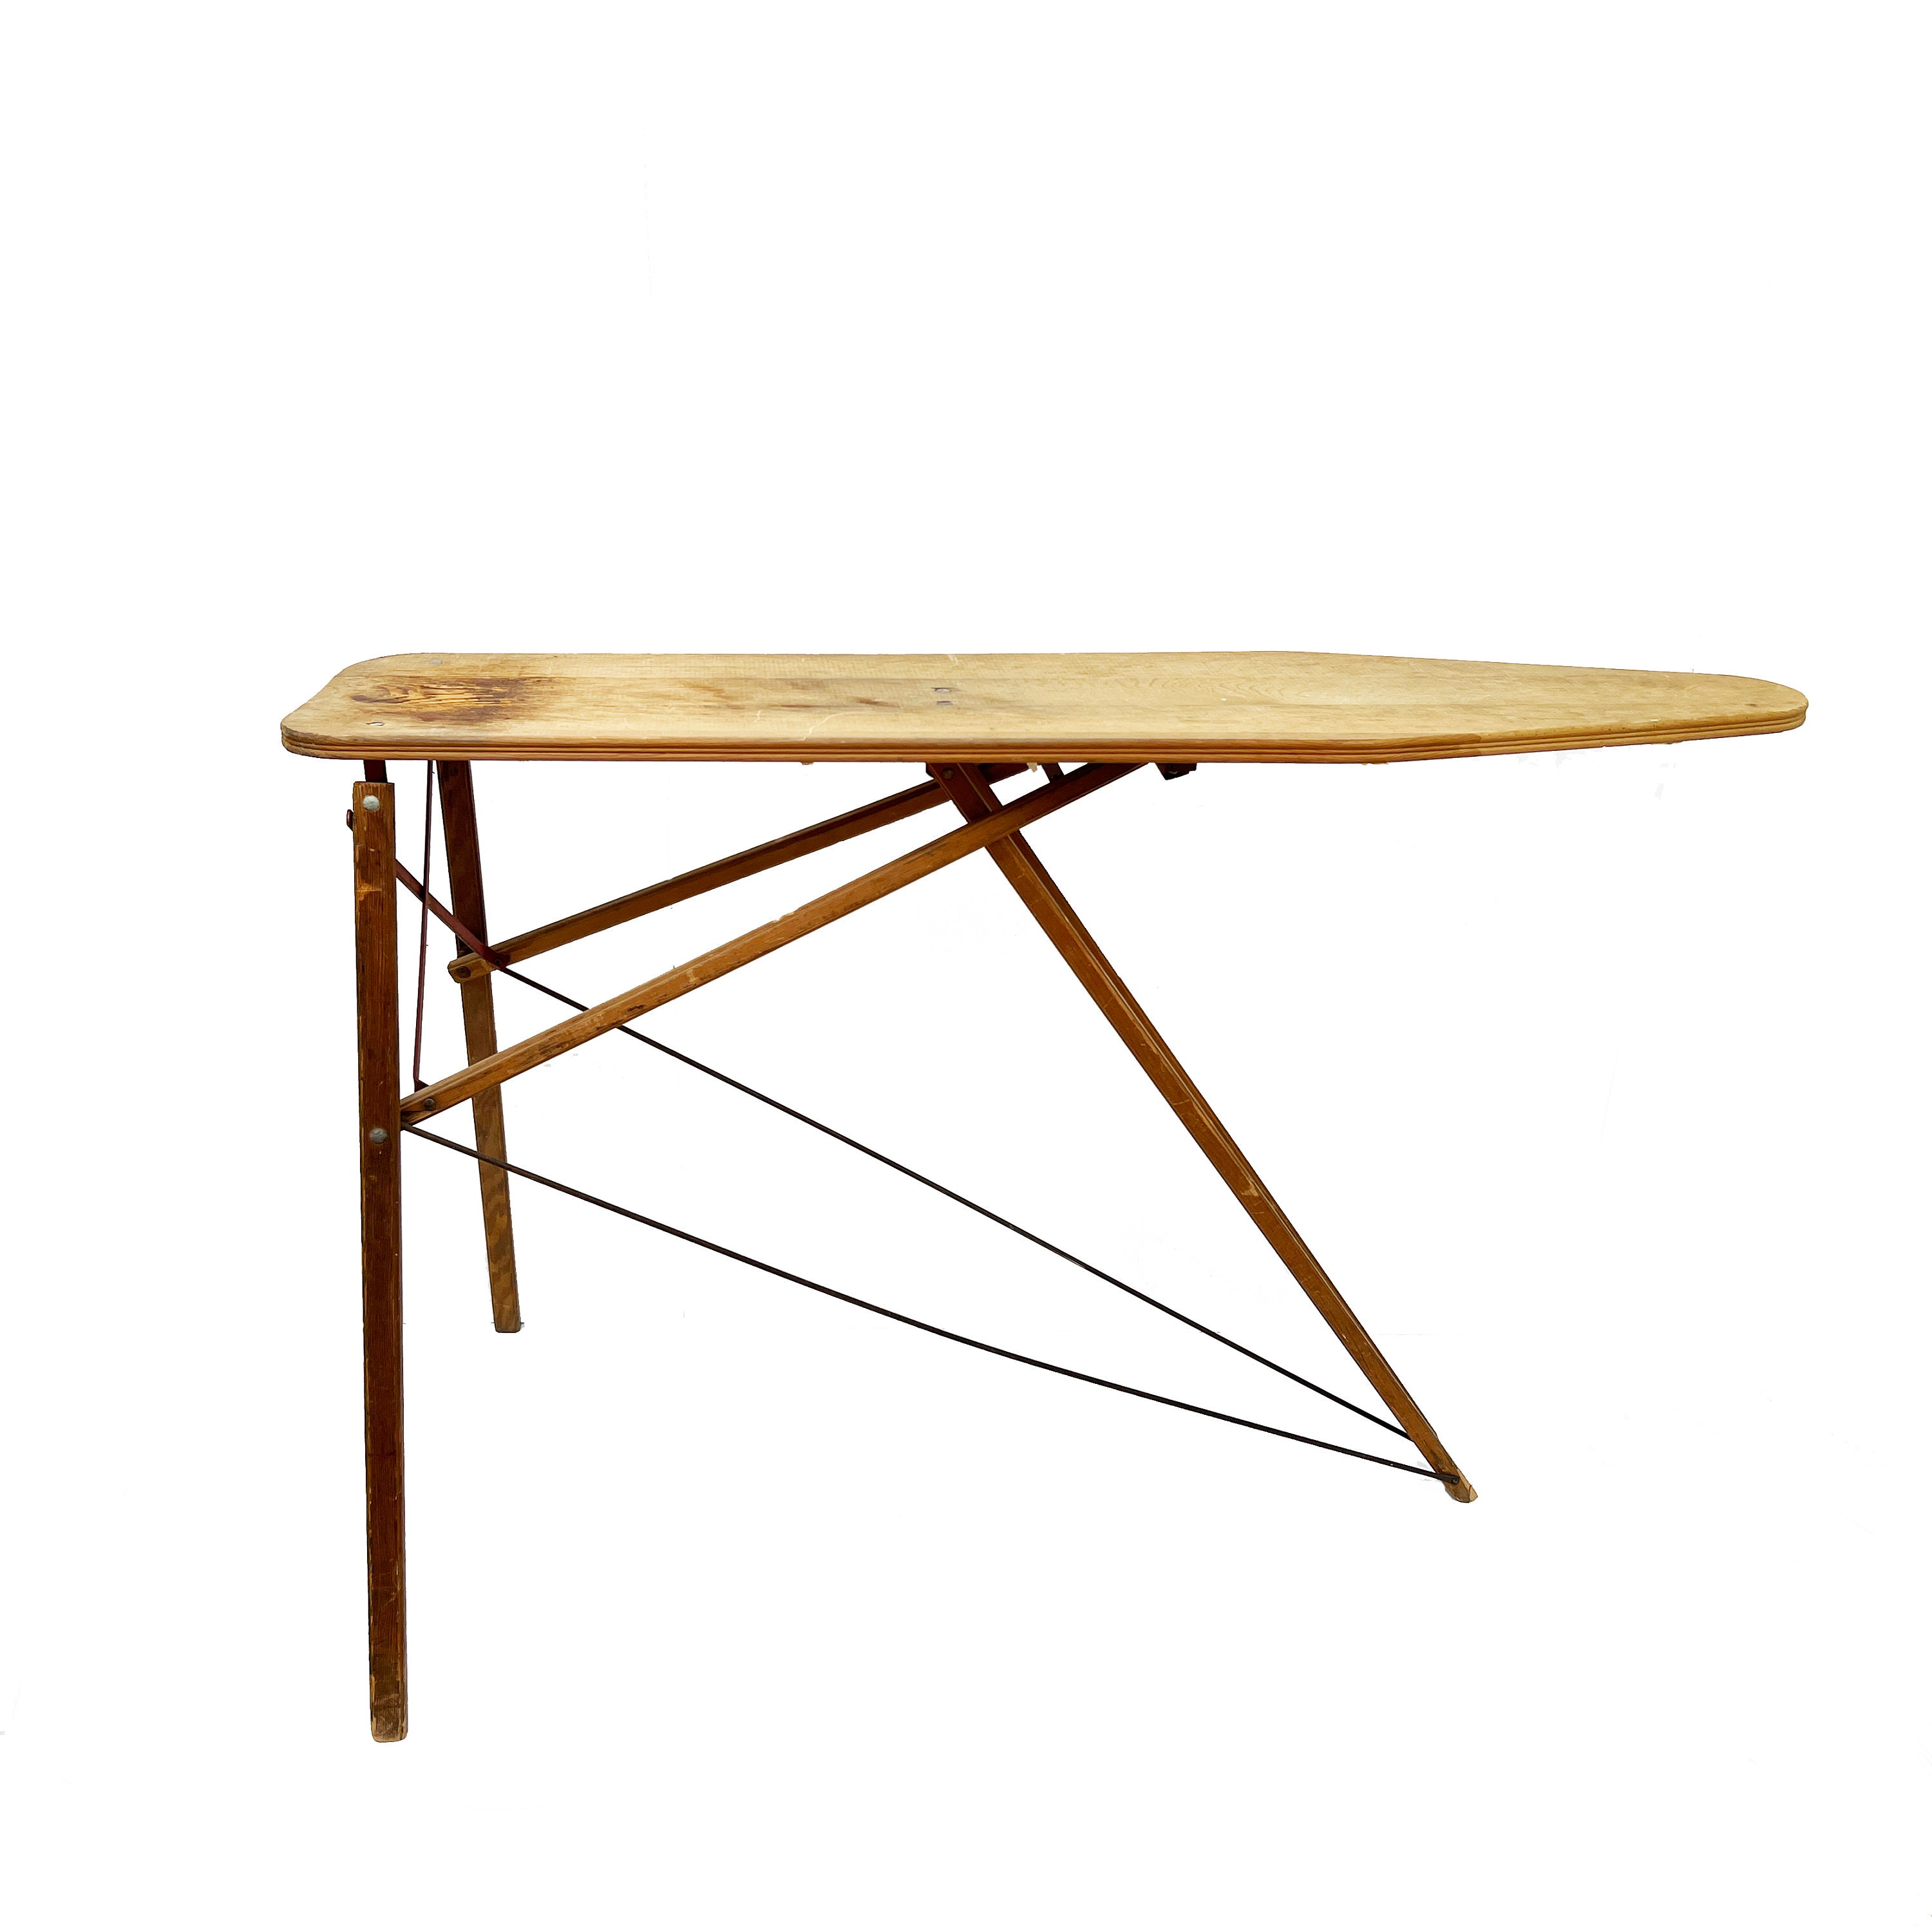 Cherry Wood Ironing Board and Olden Days Wooden Play Iron 